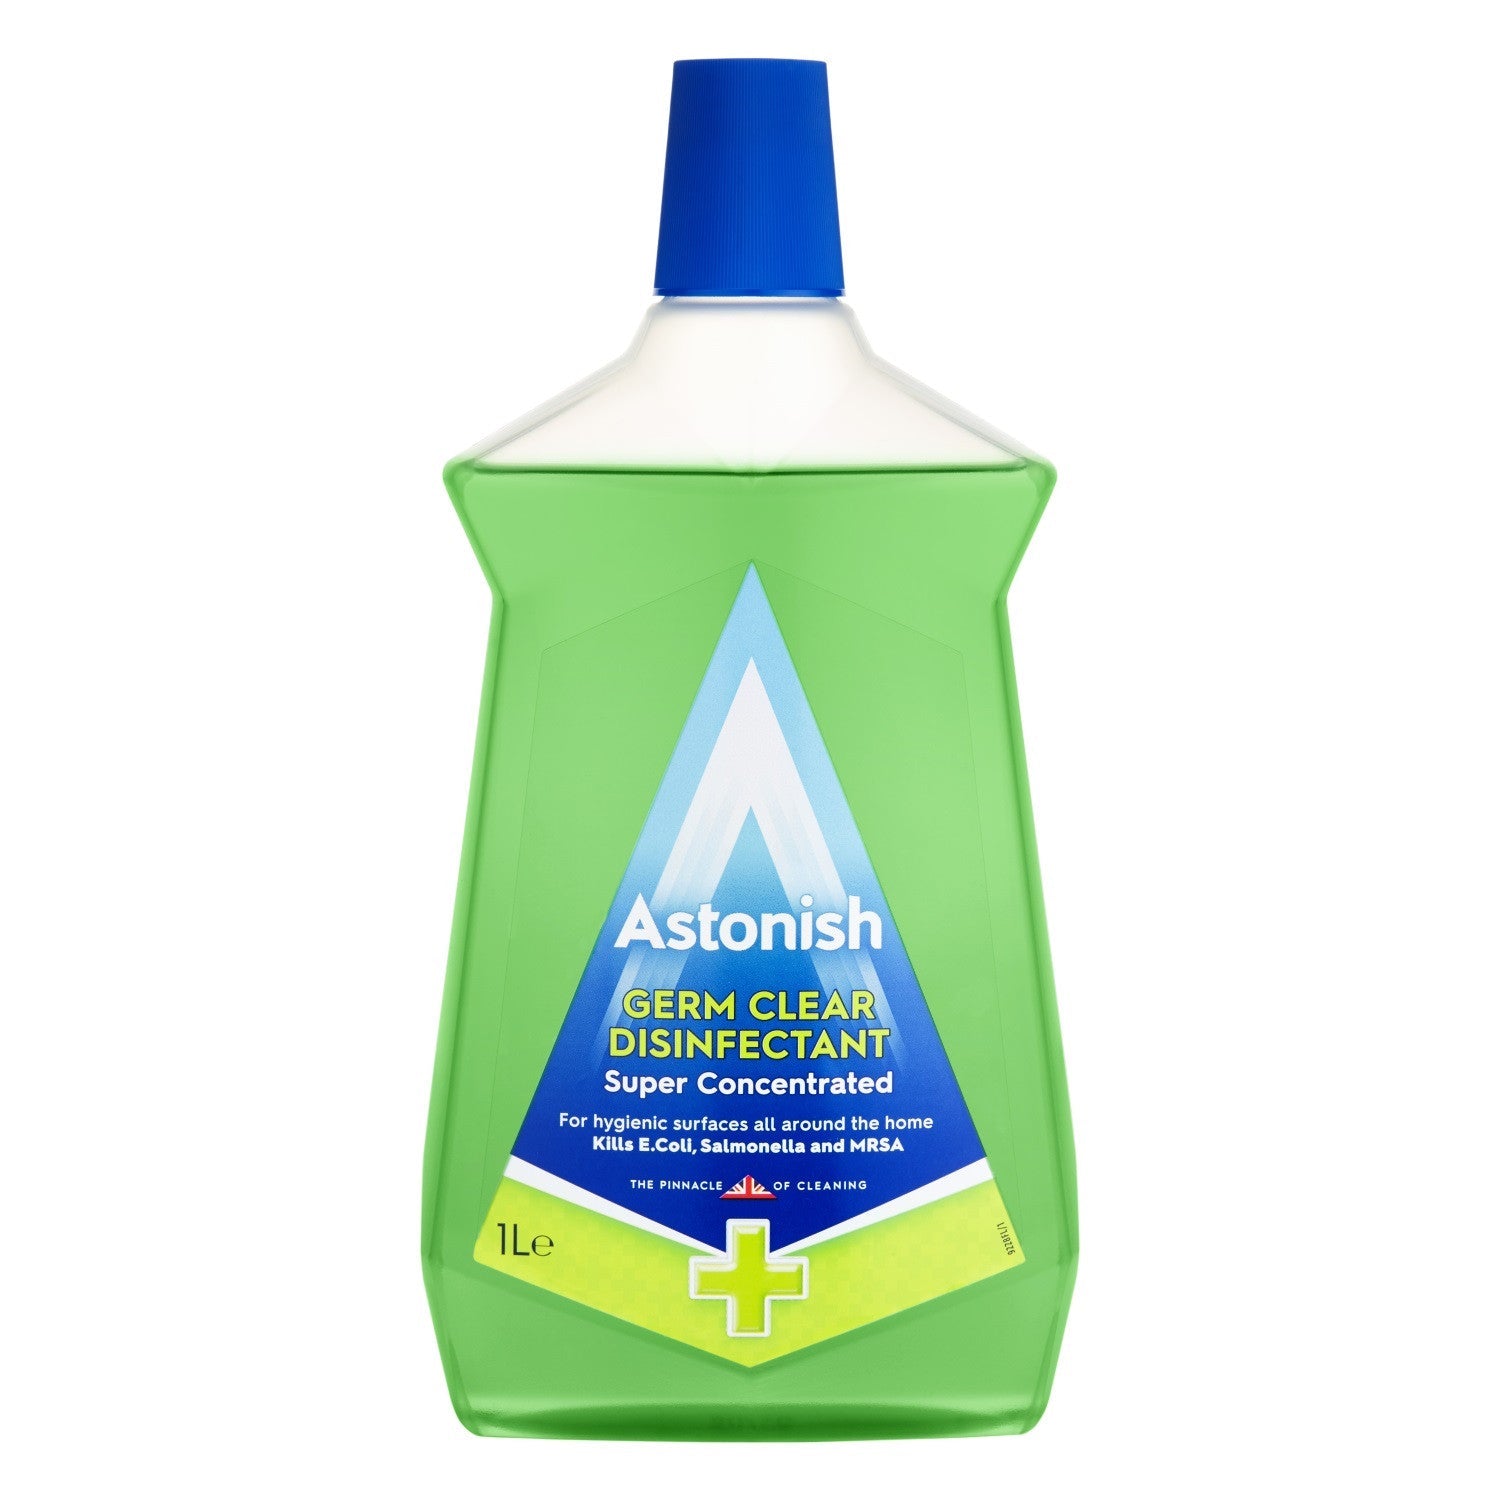 Astonish C9228 Germ Clear Disinfectant 1Ltr Bottle - Premium Disinfectants from ASTONISH - Just $1.25! Shop now at W Hurst & Son (IW) Ltd